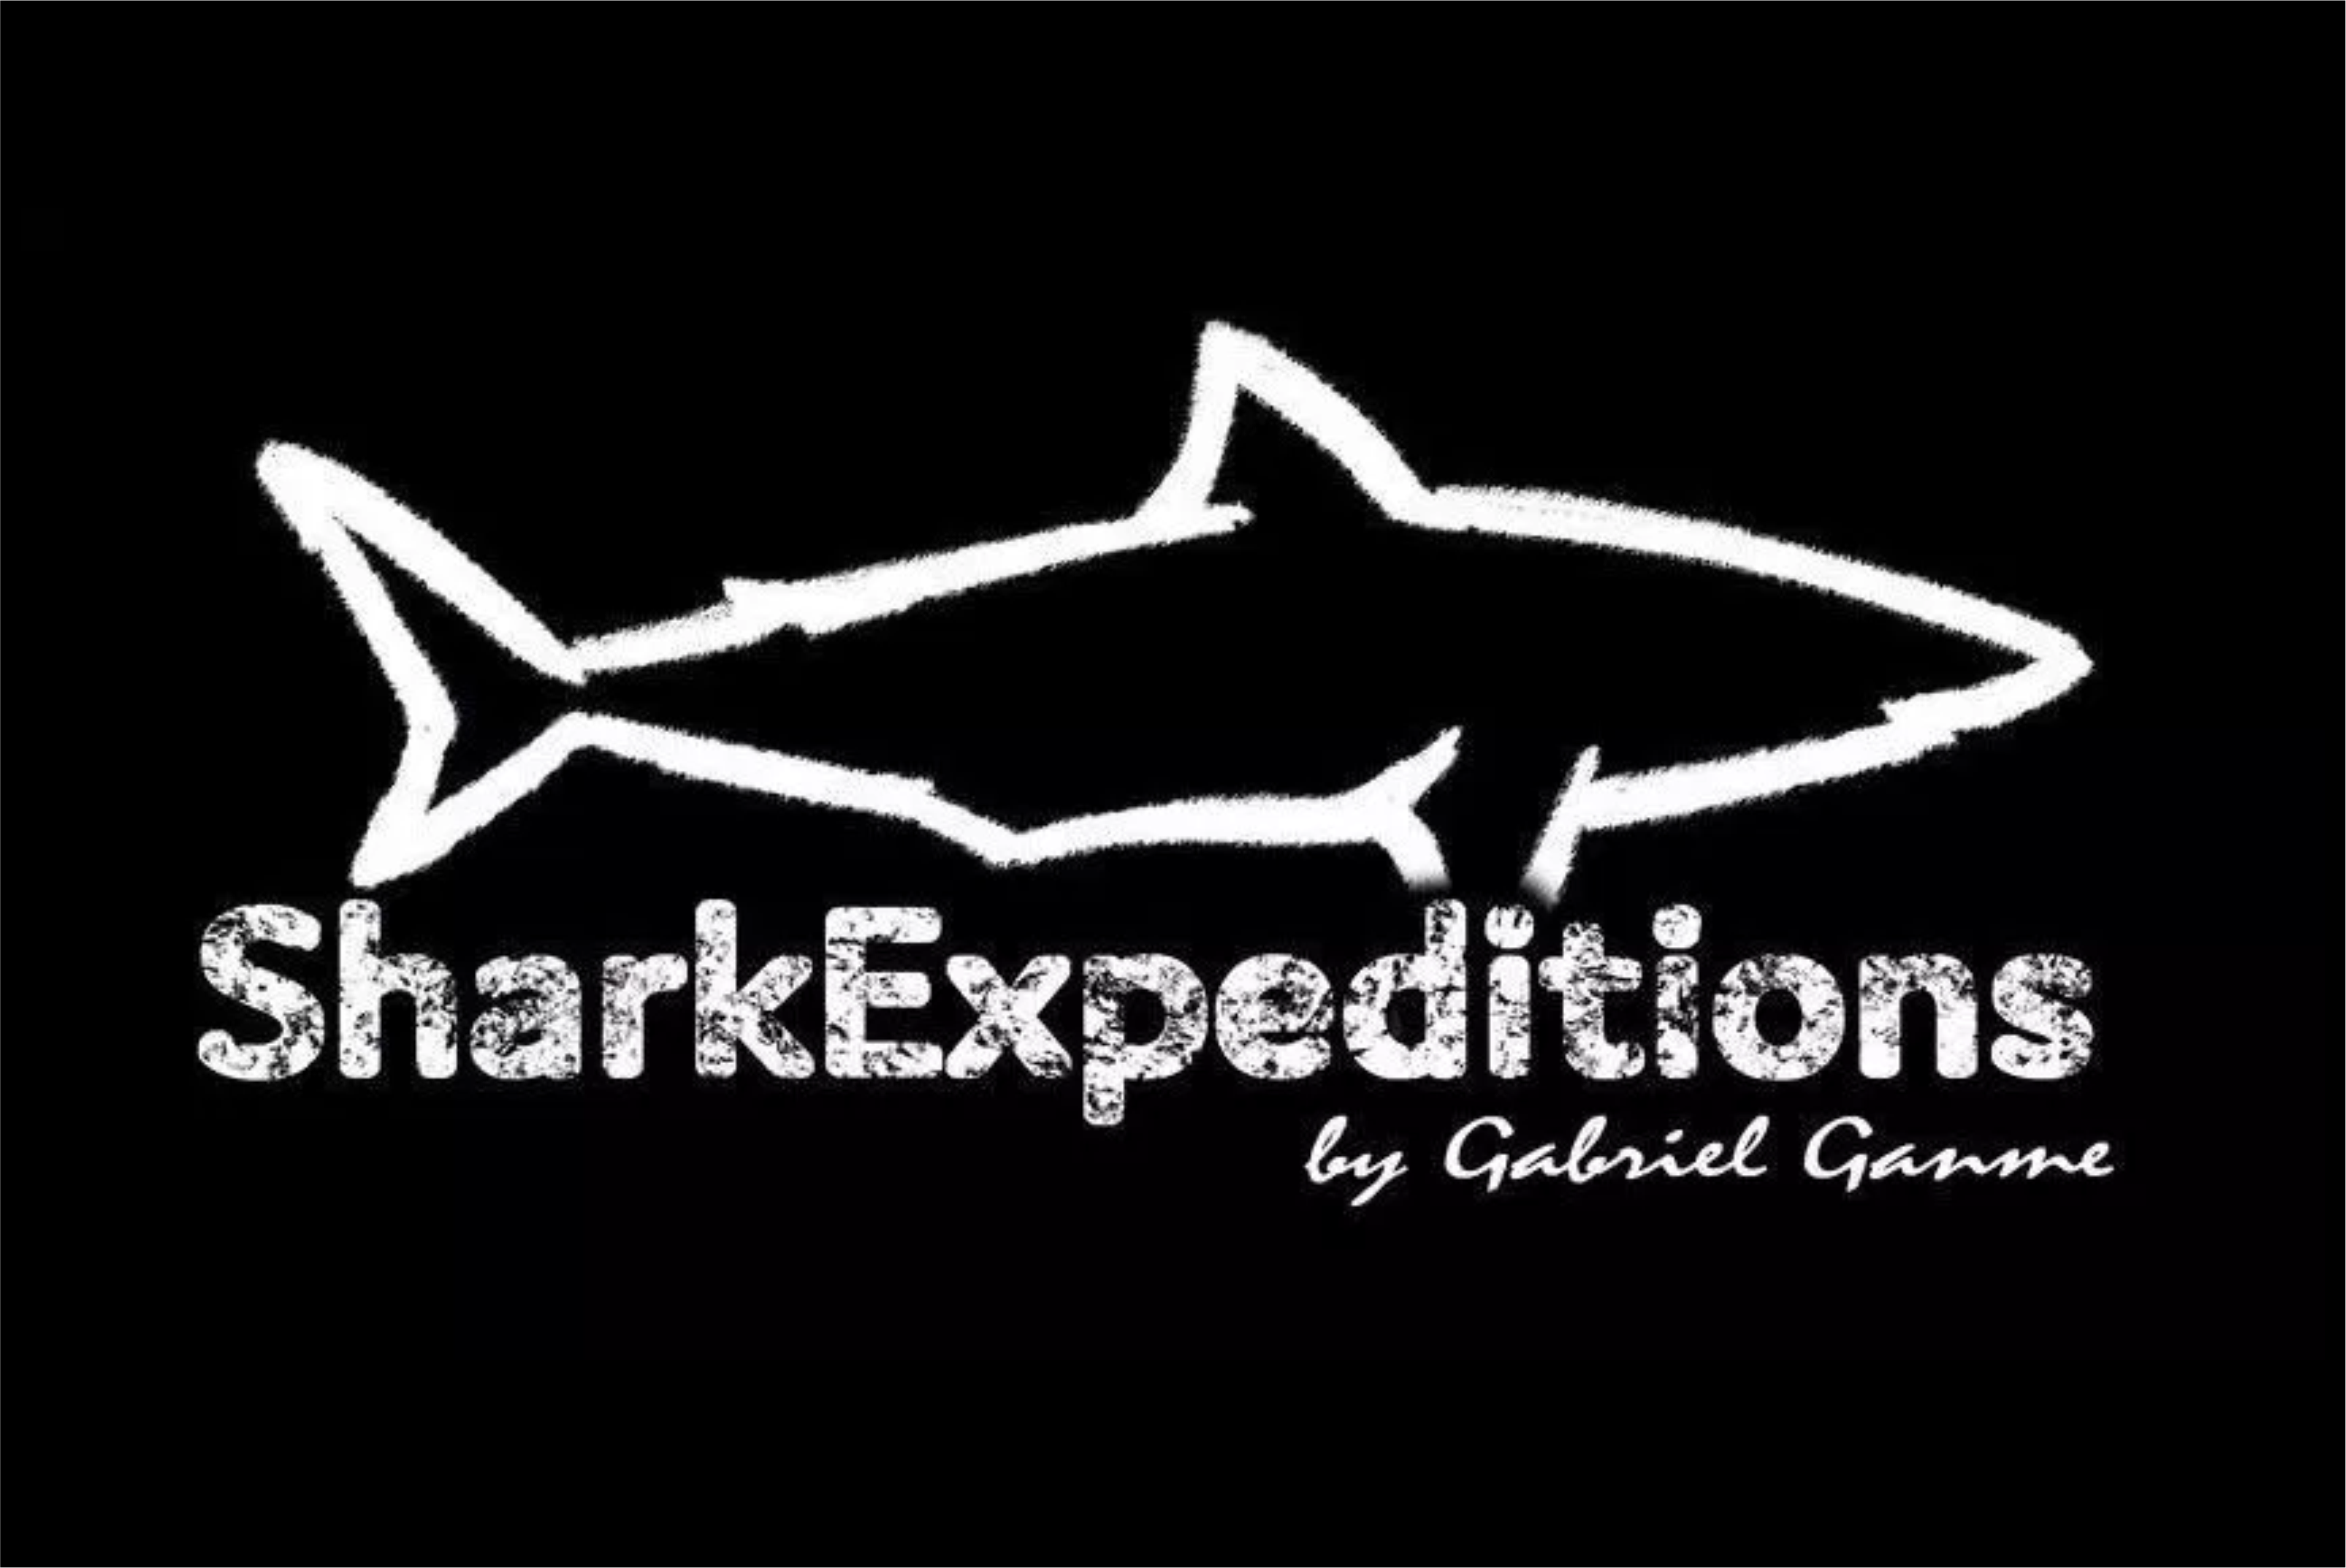 Gabriel Ganme – Shark Expeditions